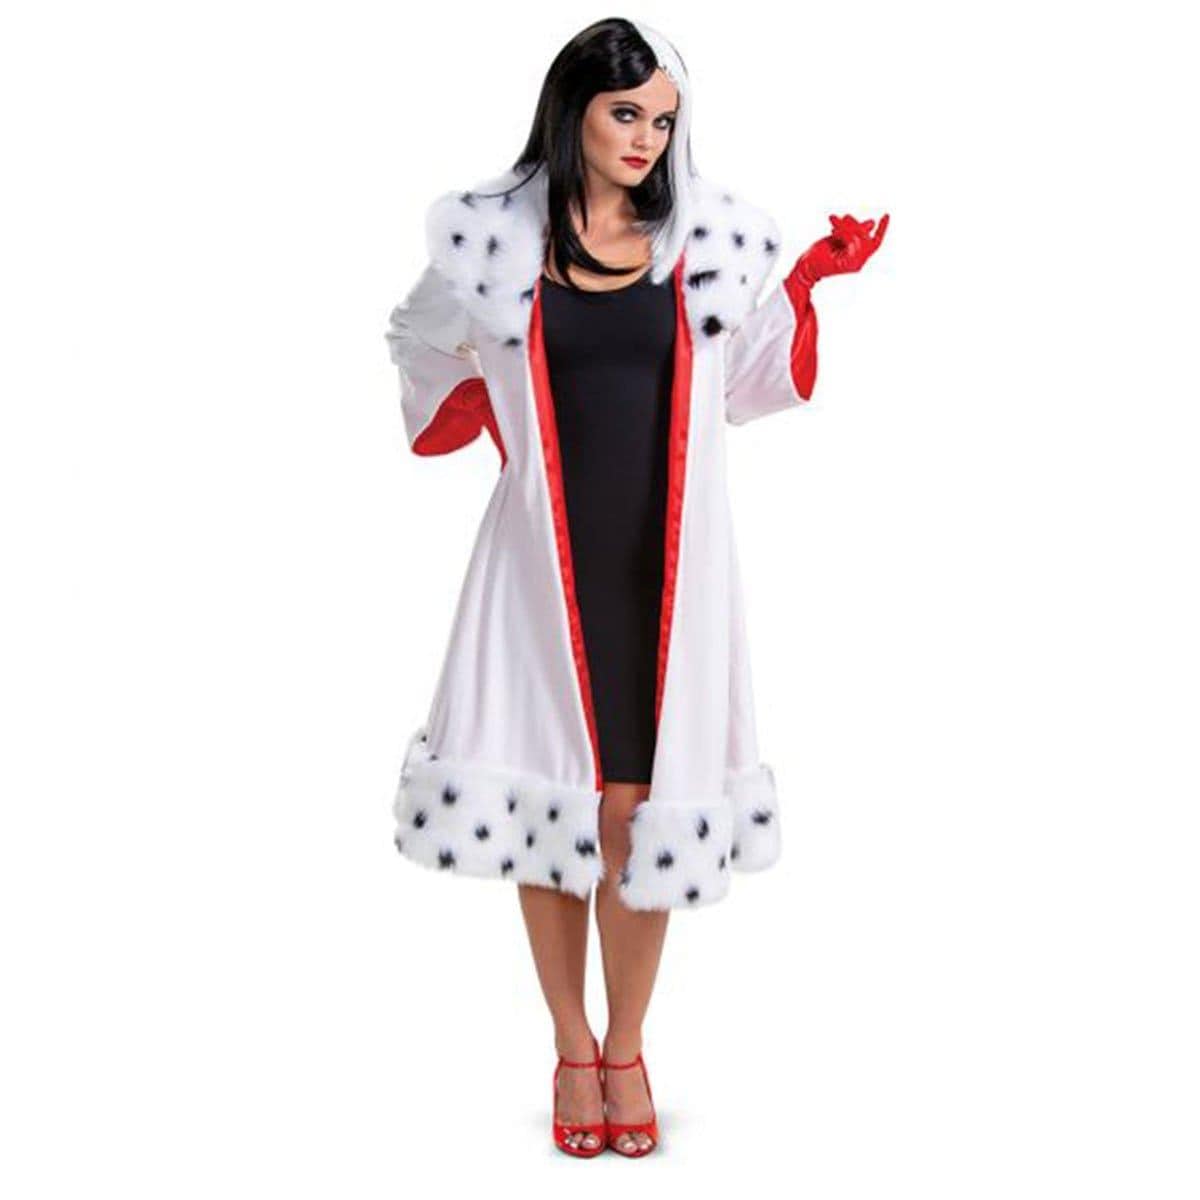 Buy Costume Accessories Cruella Jacket Deluxe for Women, 101 Dalmatians sold at Party Expert